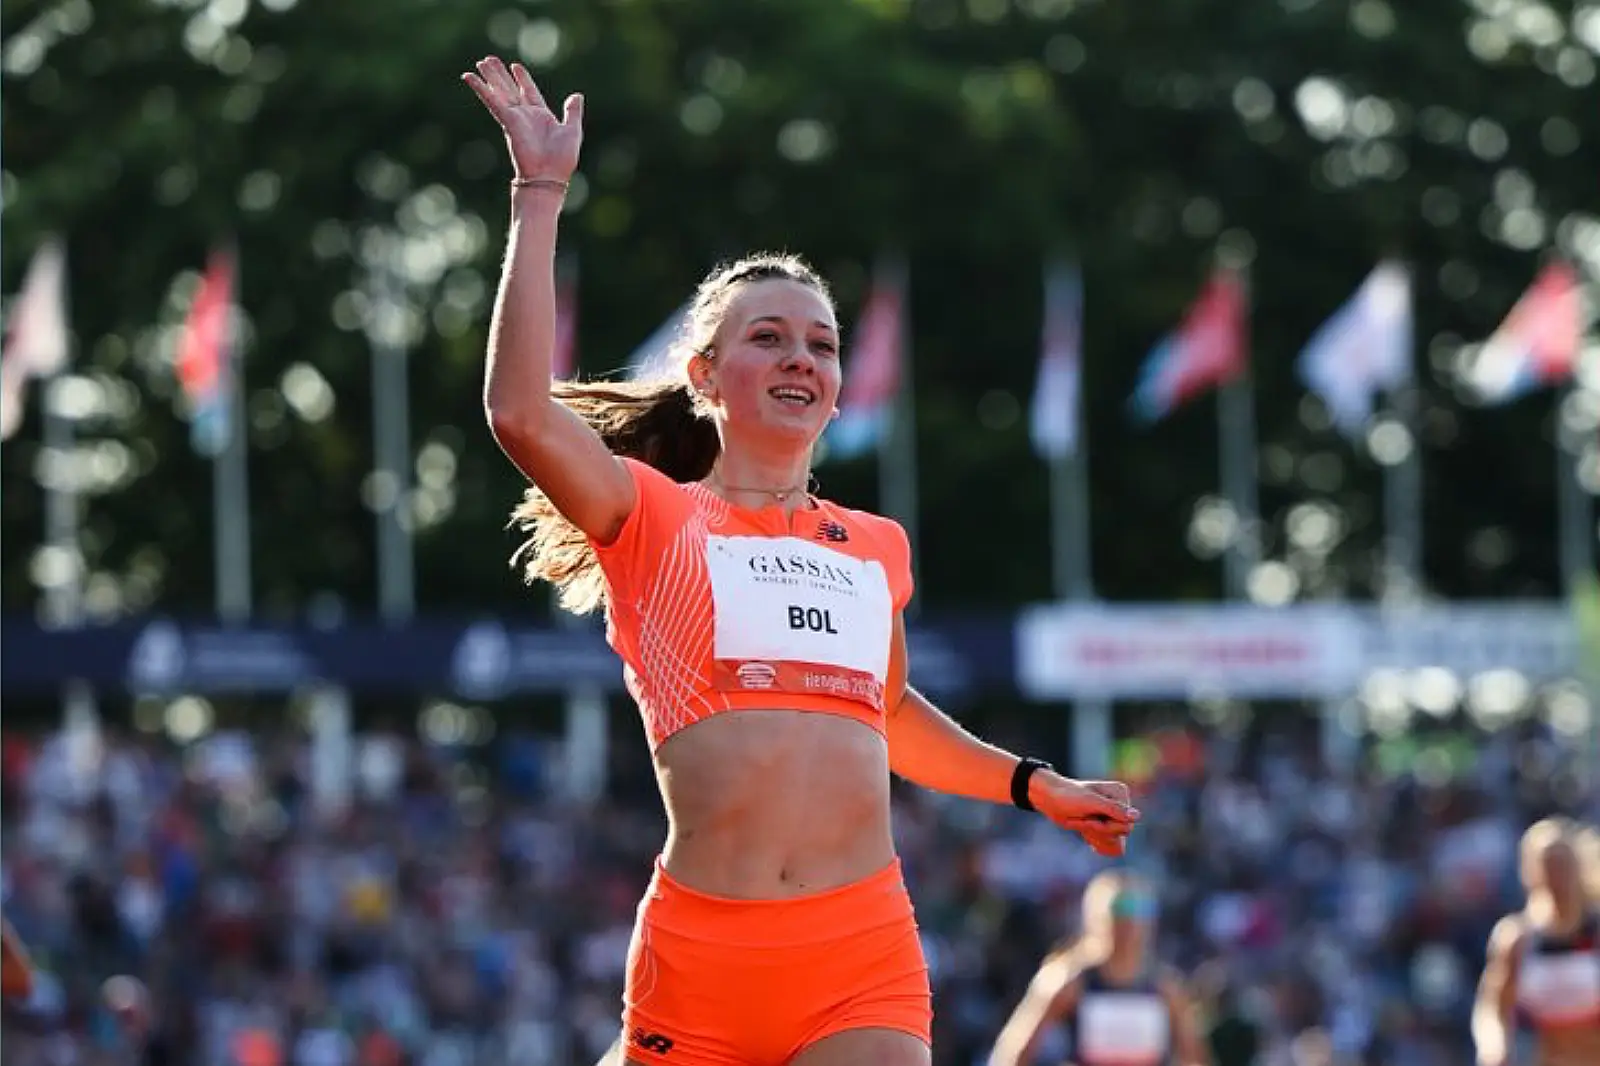 Femke Bol finishes second in 200m at Dutch National Track and Field Championships